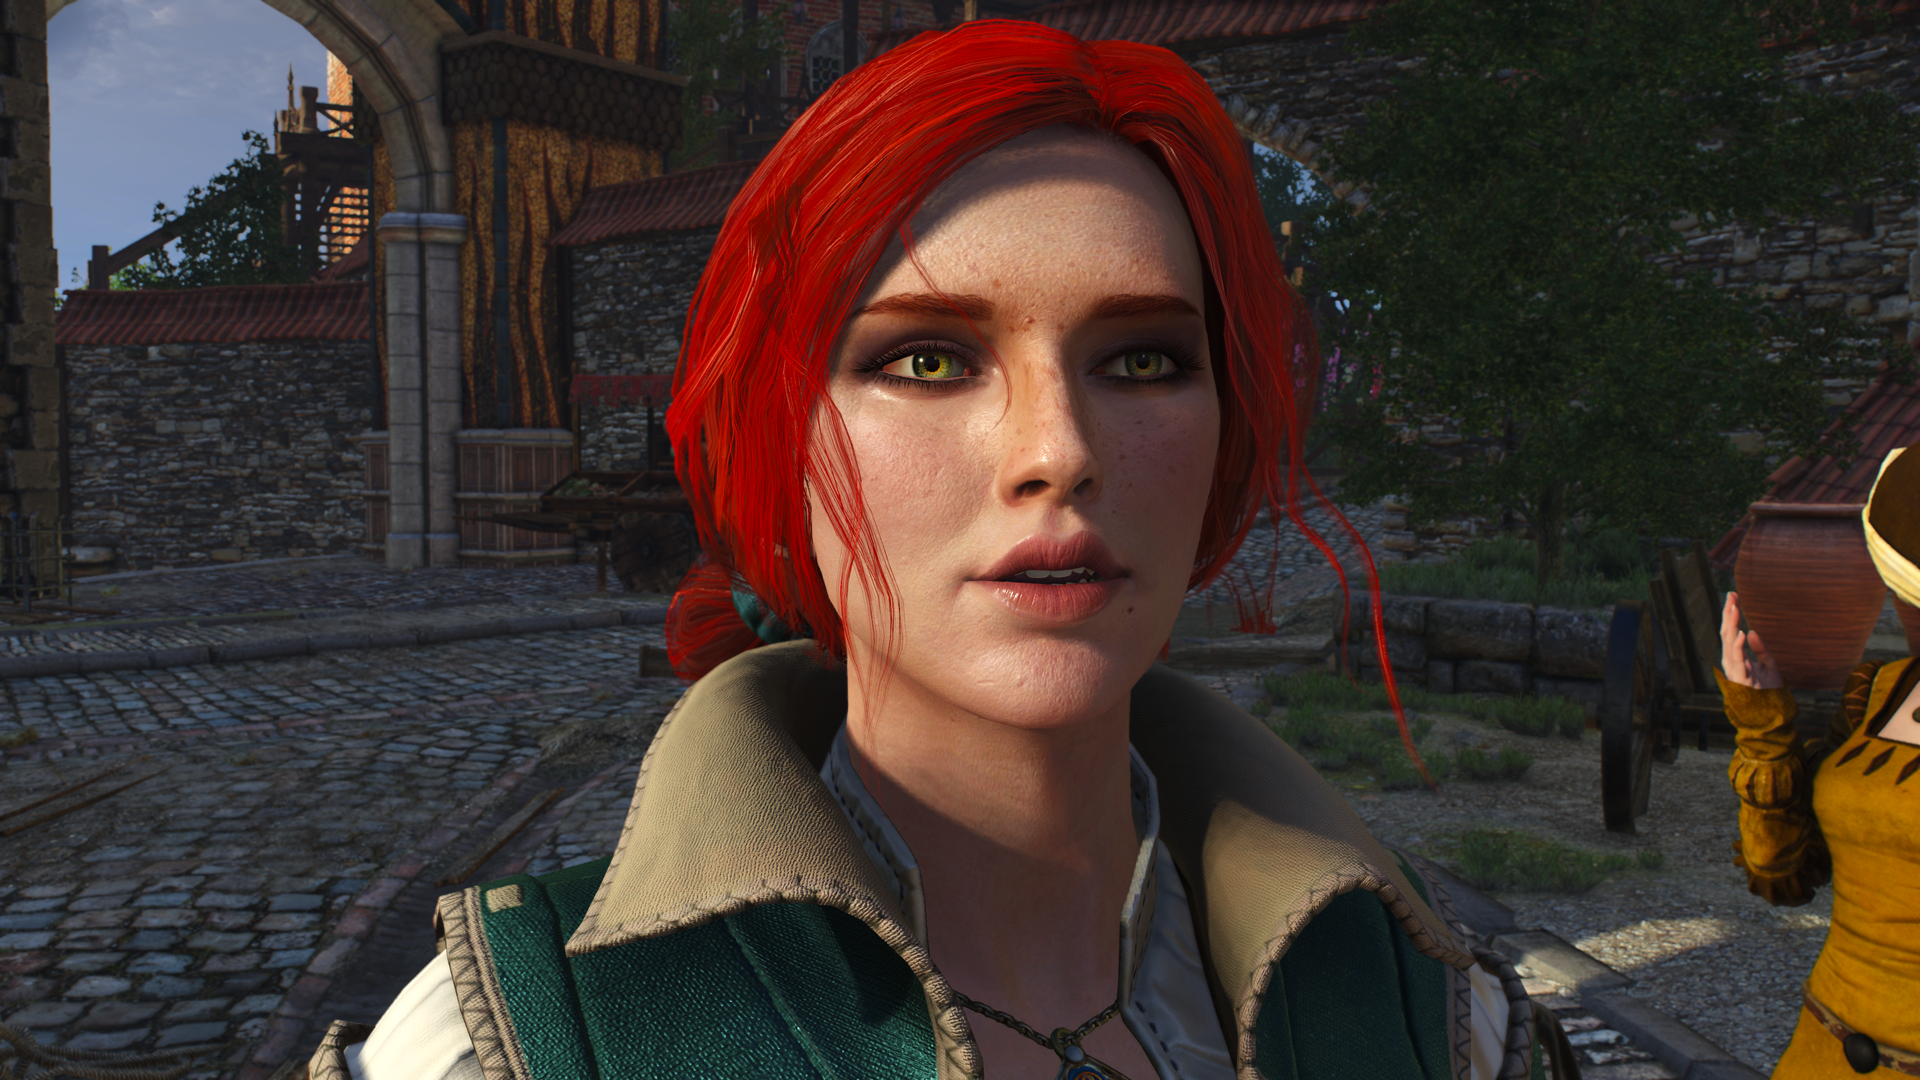 witcher3_2015_12_27_1vtoyh.png